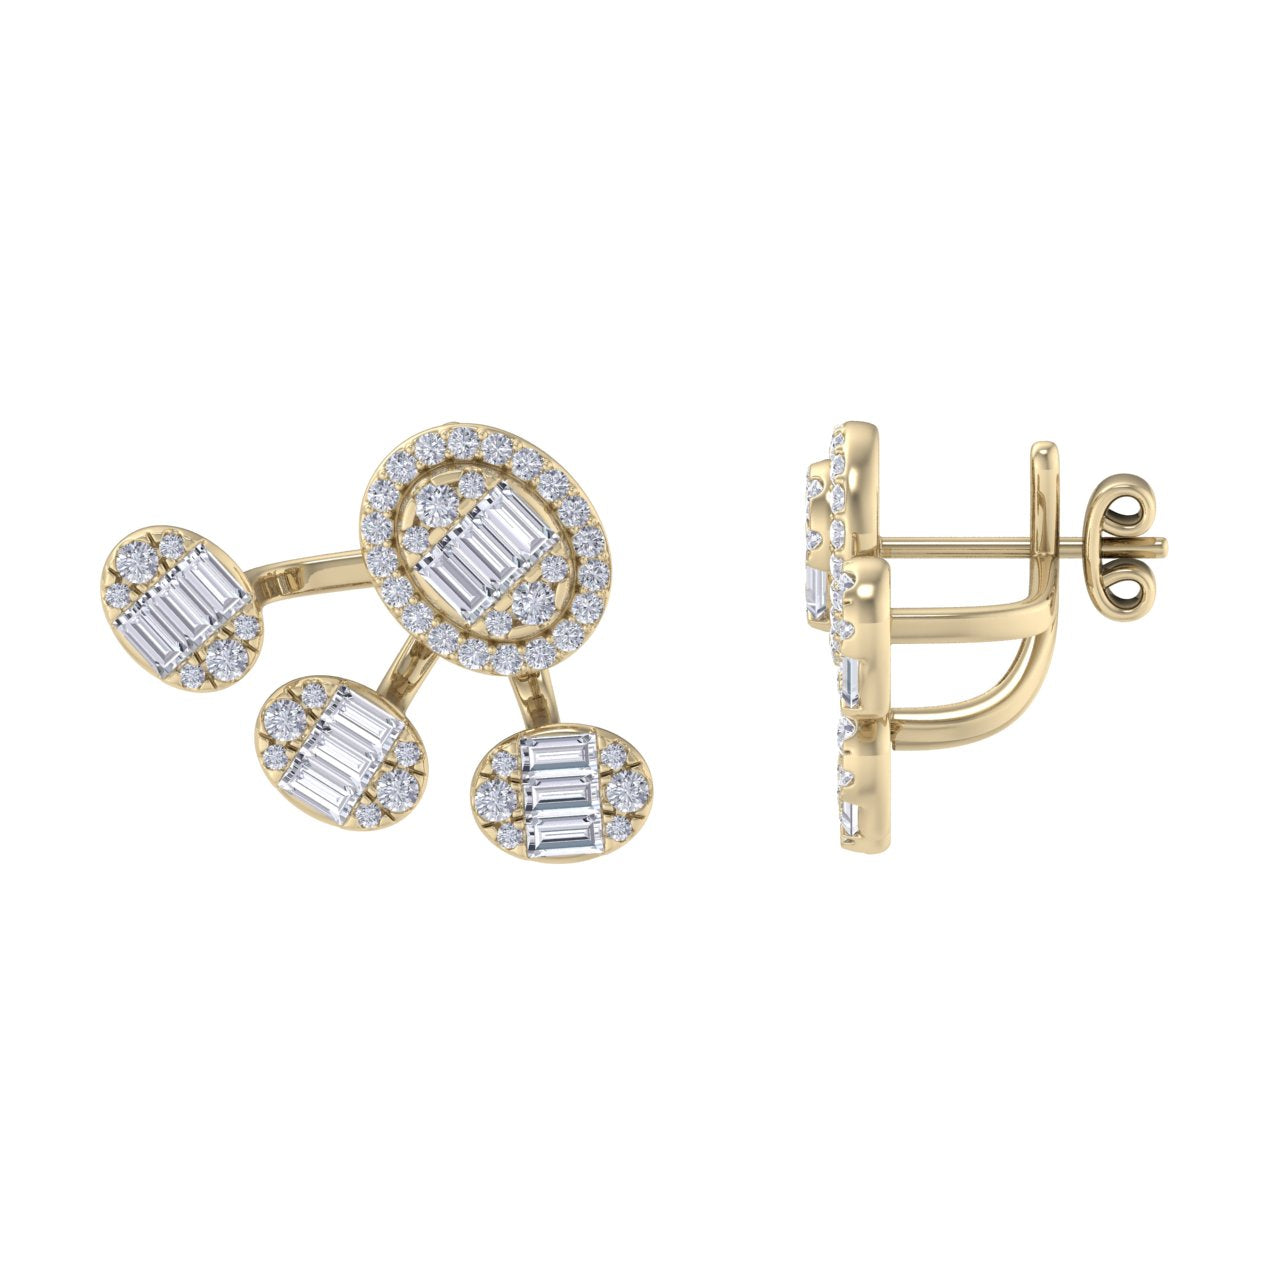 Duo earrings in yellow gold with white diamonds of 1.70 ct in weight